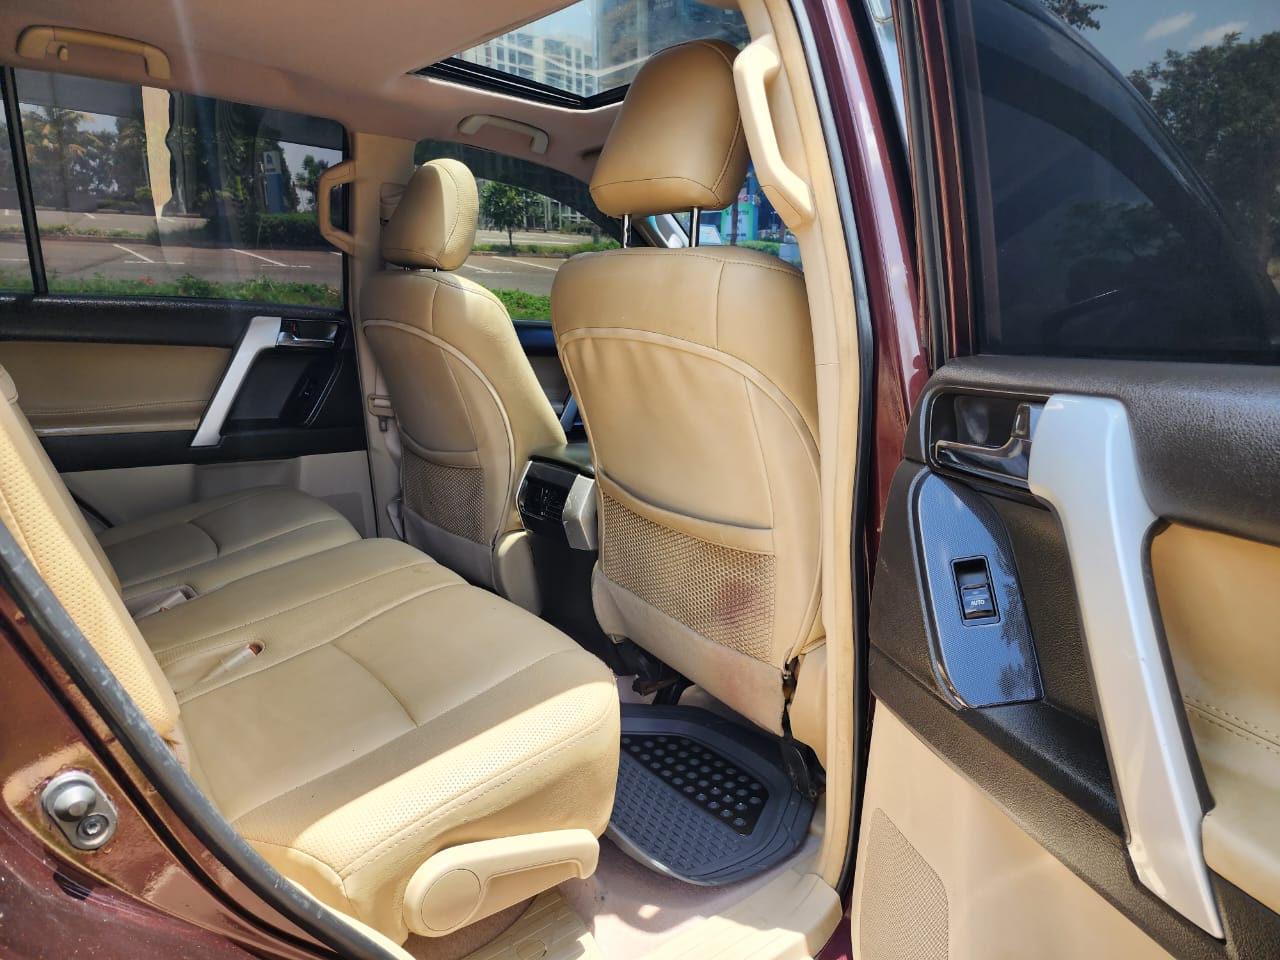 Toyota Prado j150 2018 Facelift with SUNROOF QUICK SALE You Pay 30% Deposit Trade in OK